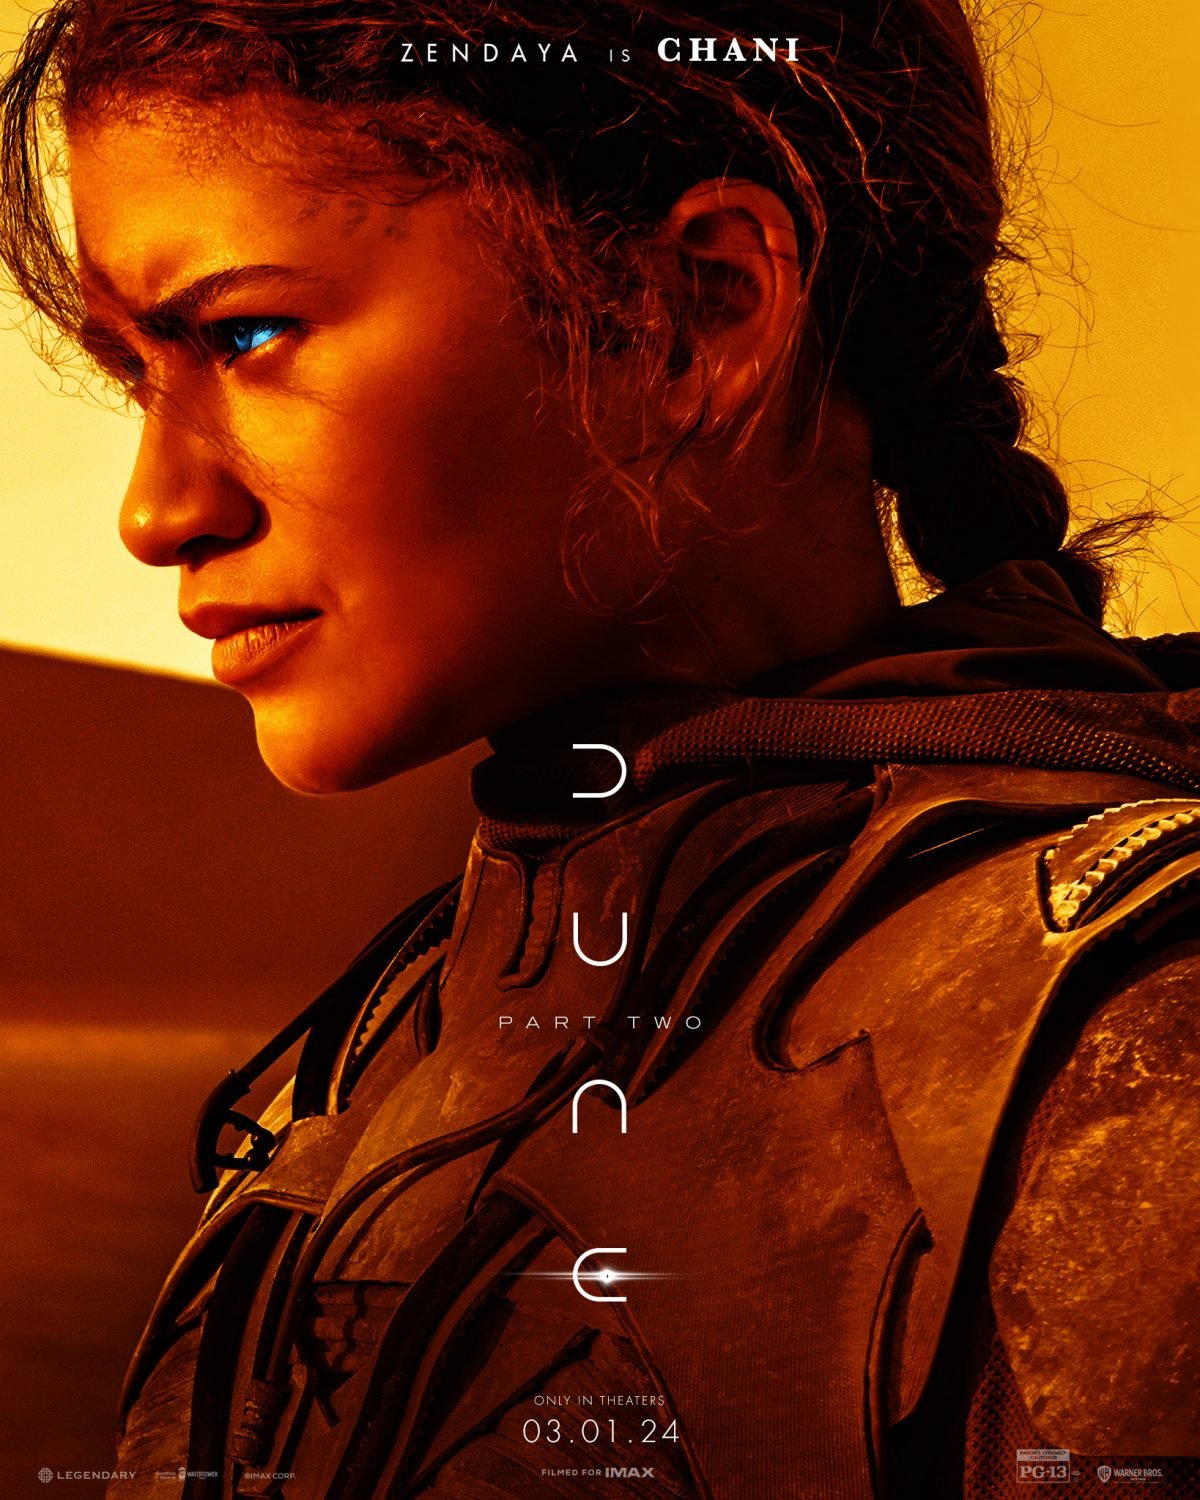 A Dune: Part Two poster of Zendaya's Chani looking to the side